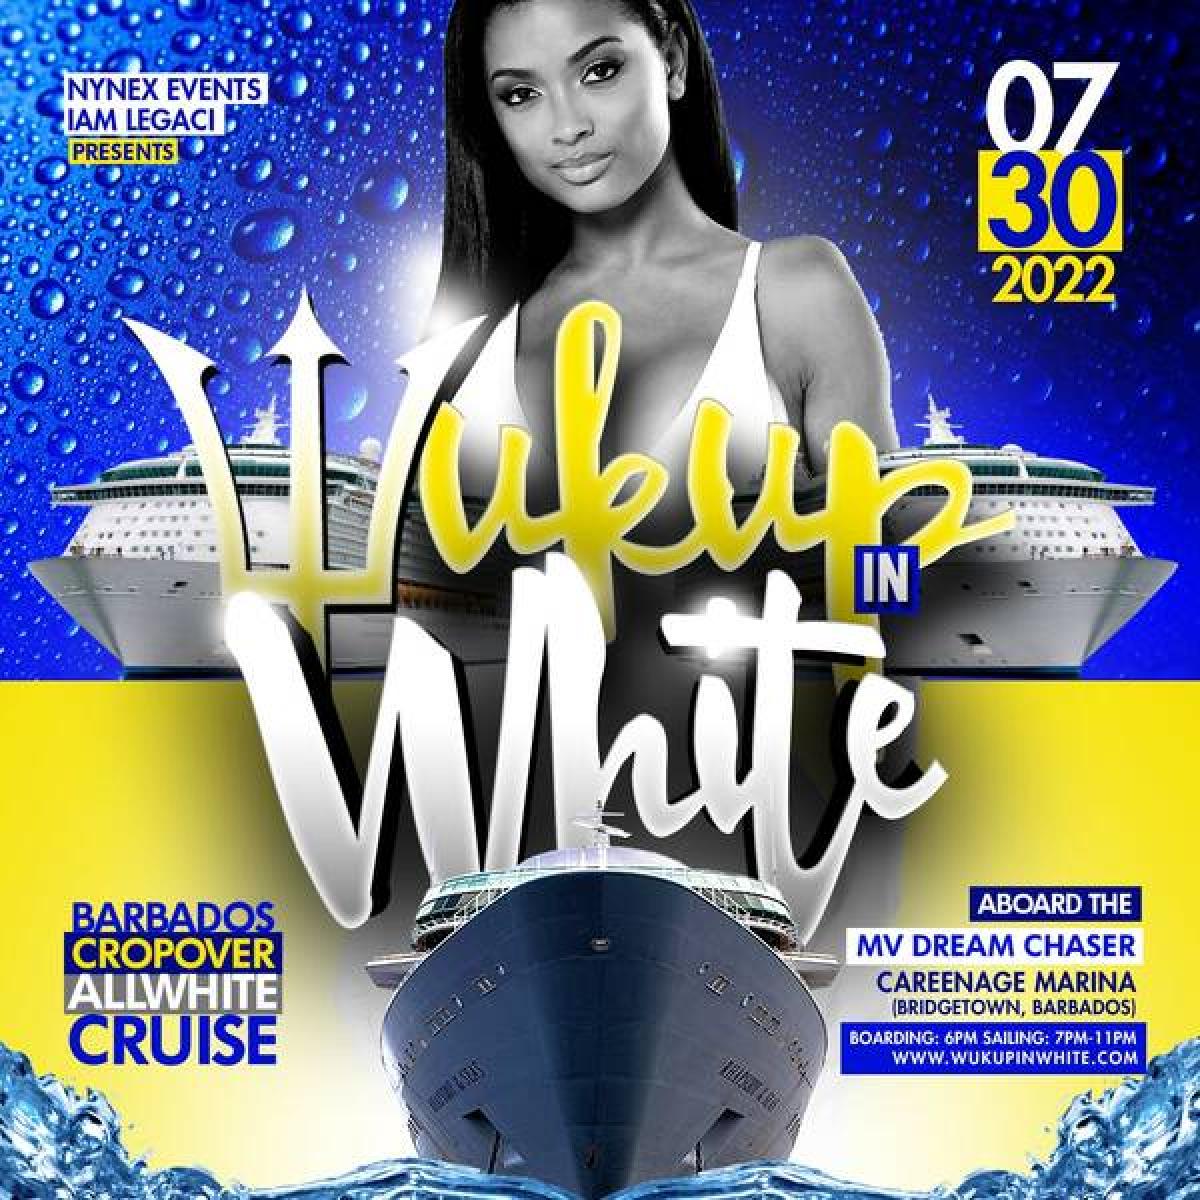 Wuk Up In White  flyer or graphic.